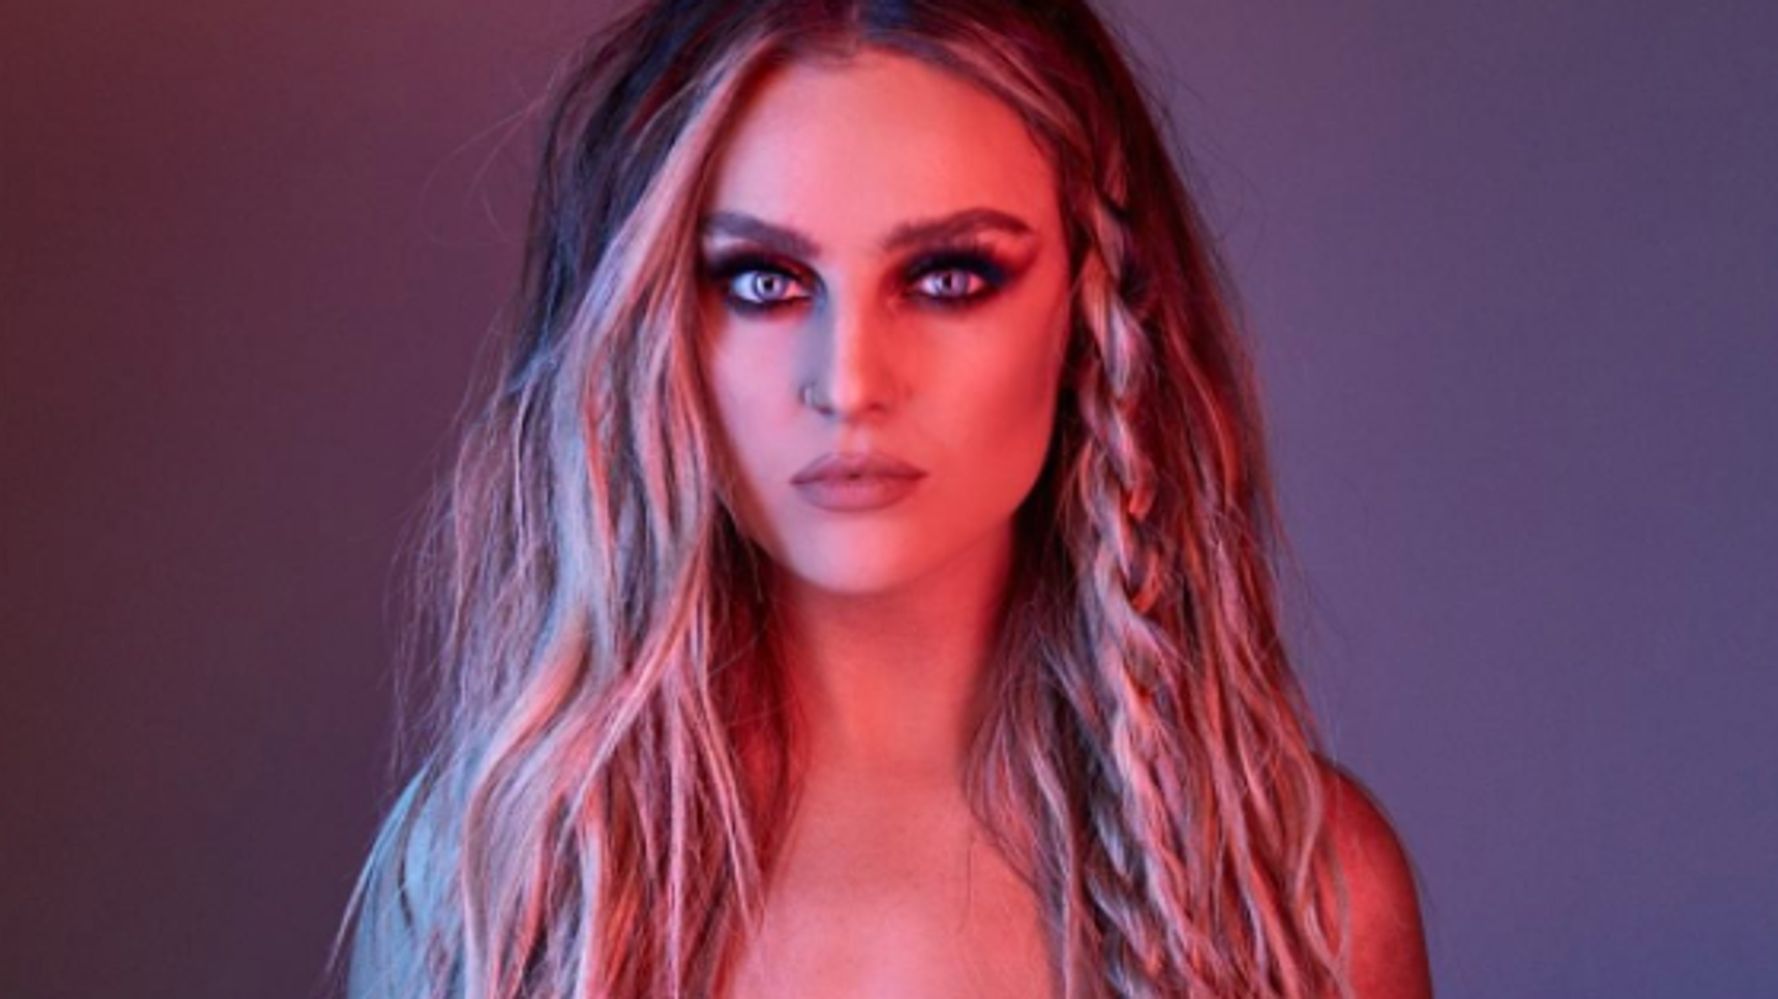 Little Mix Singer Perrie Edwards Inspires Fans To Love Their Scars With